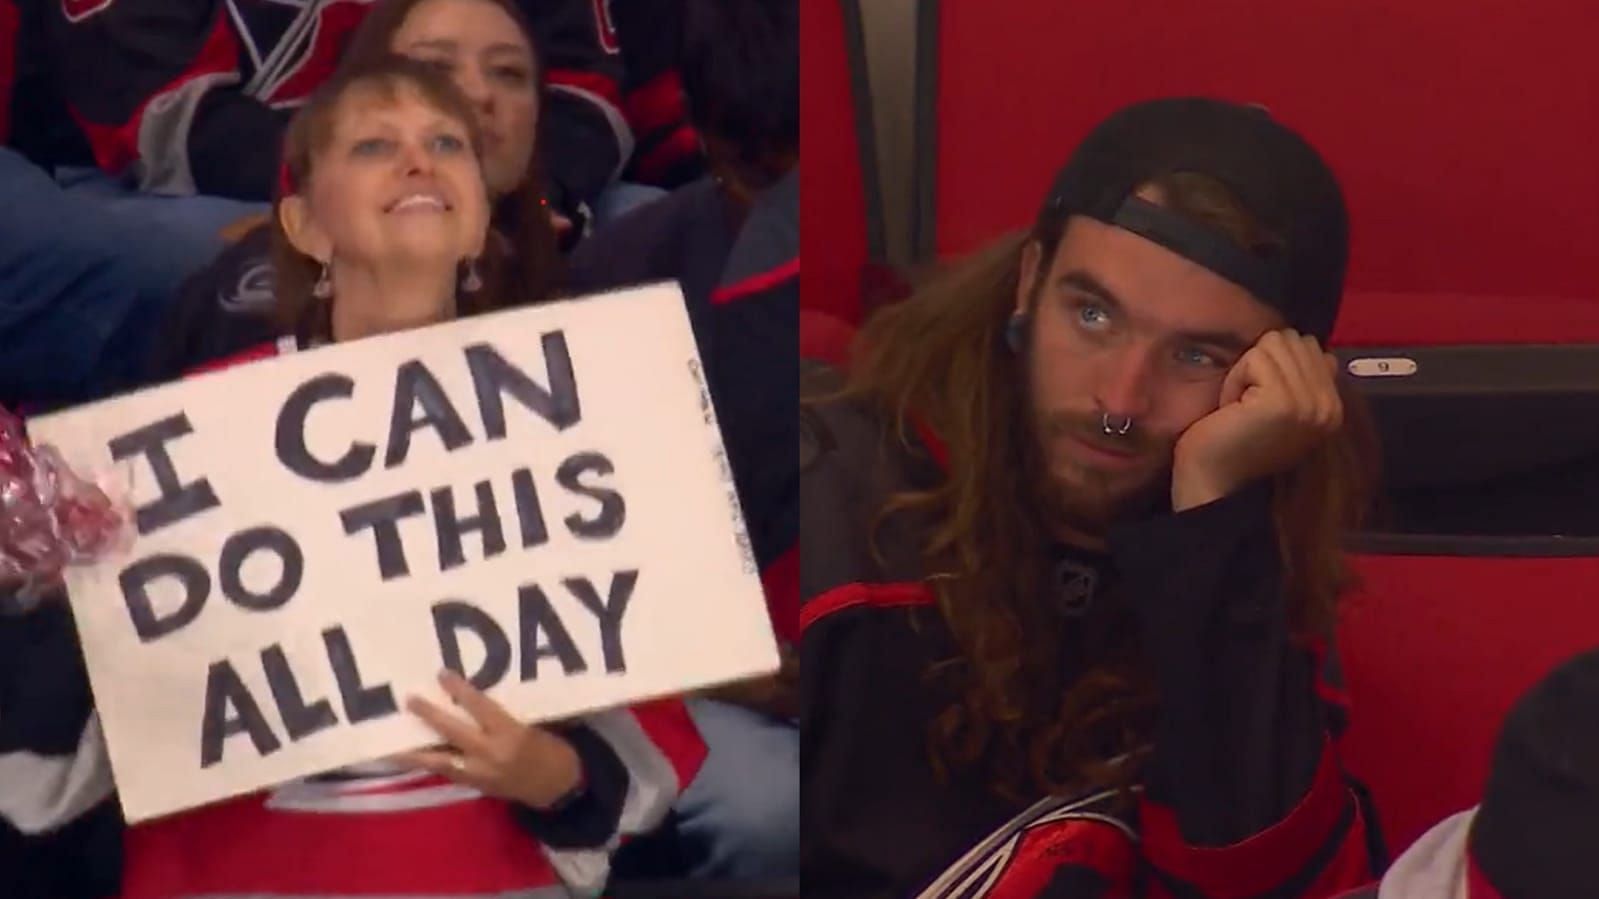  NHL Twitter filled with memes as Panthers beat Hurricanes after 139 minutes